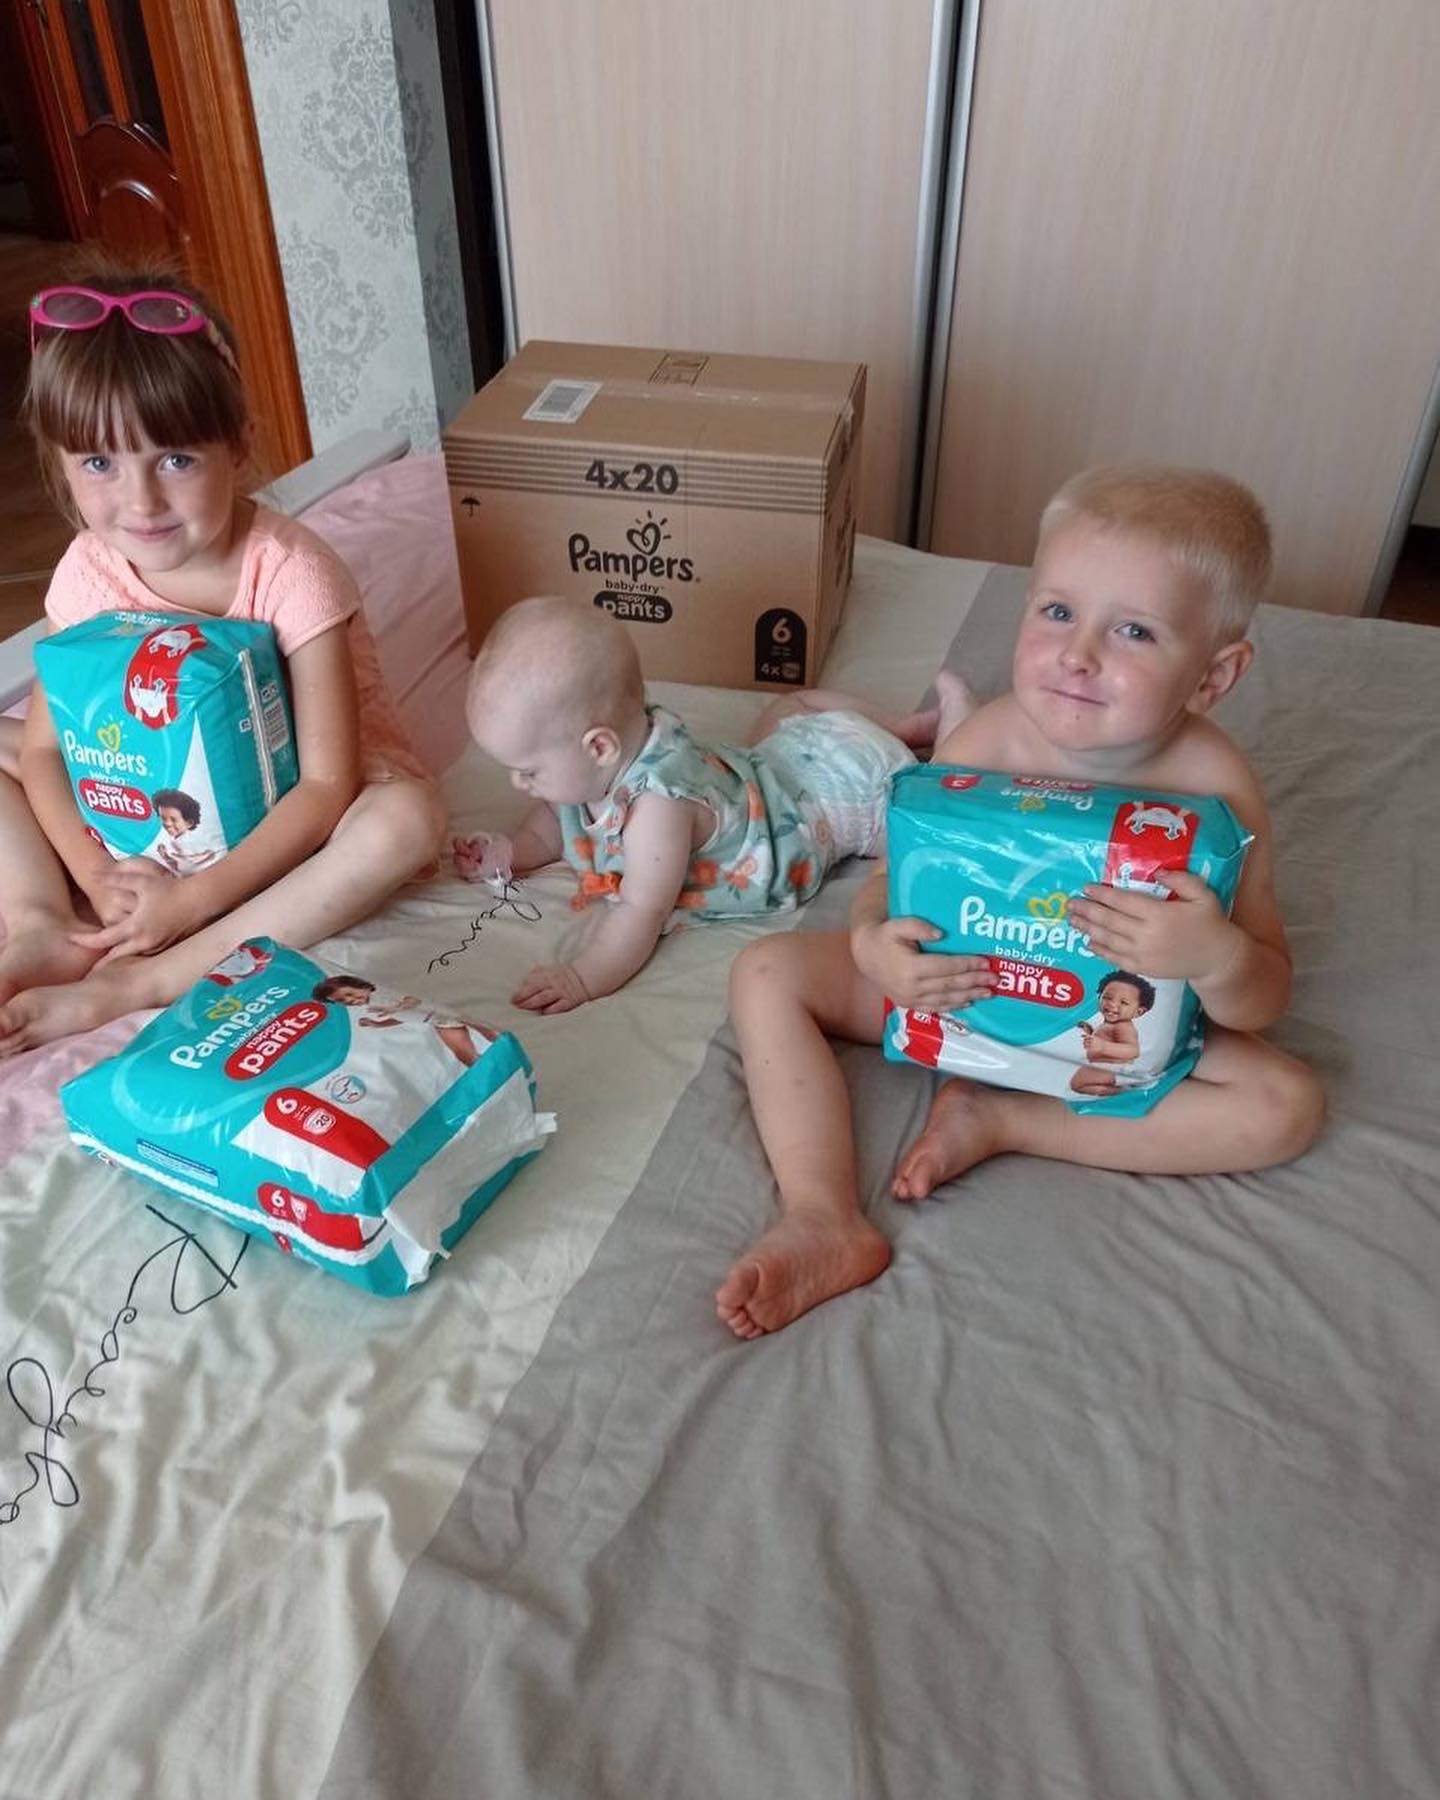 Three small children sitting on a bed with diapers.